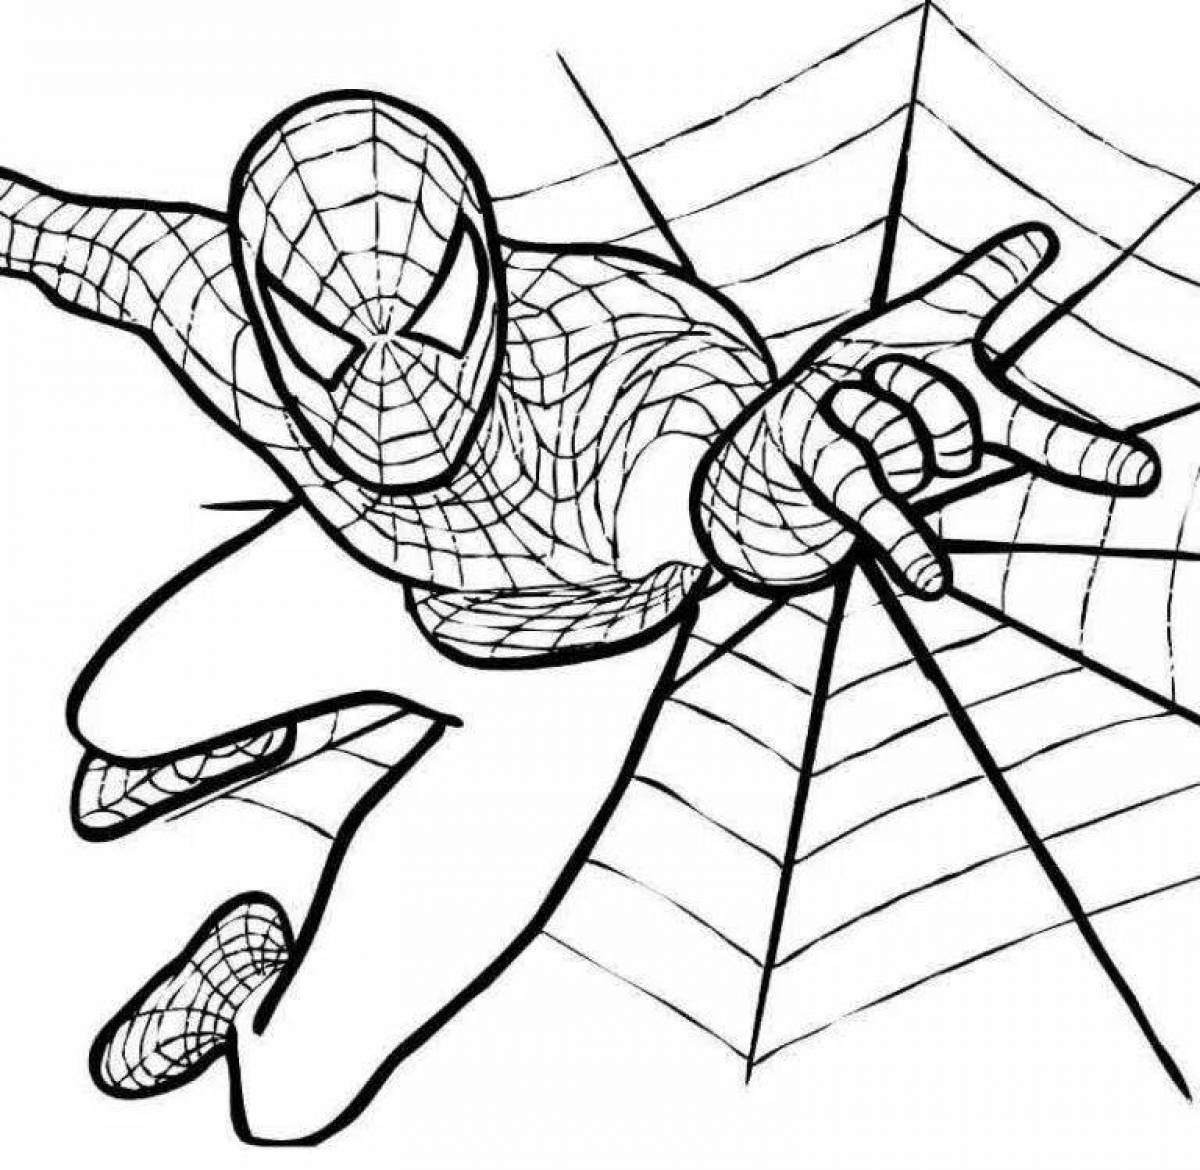 Spiderman fun coloring book for 5-6 year olds